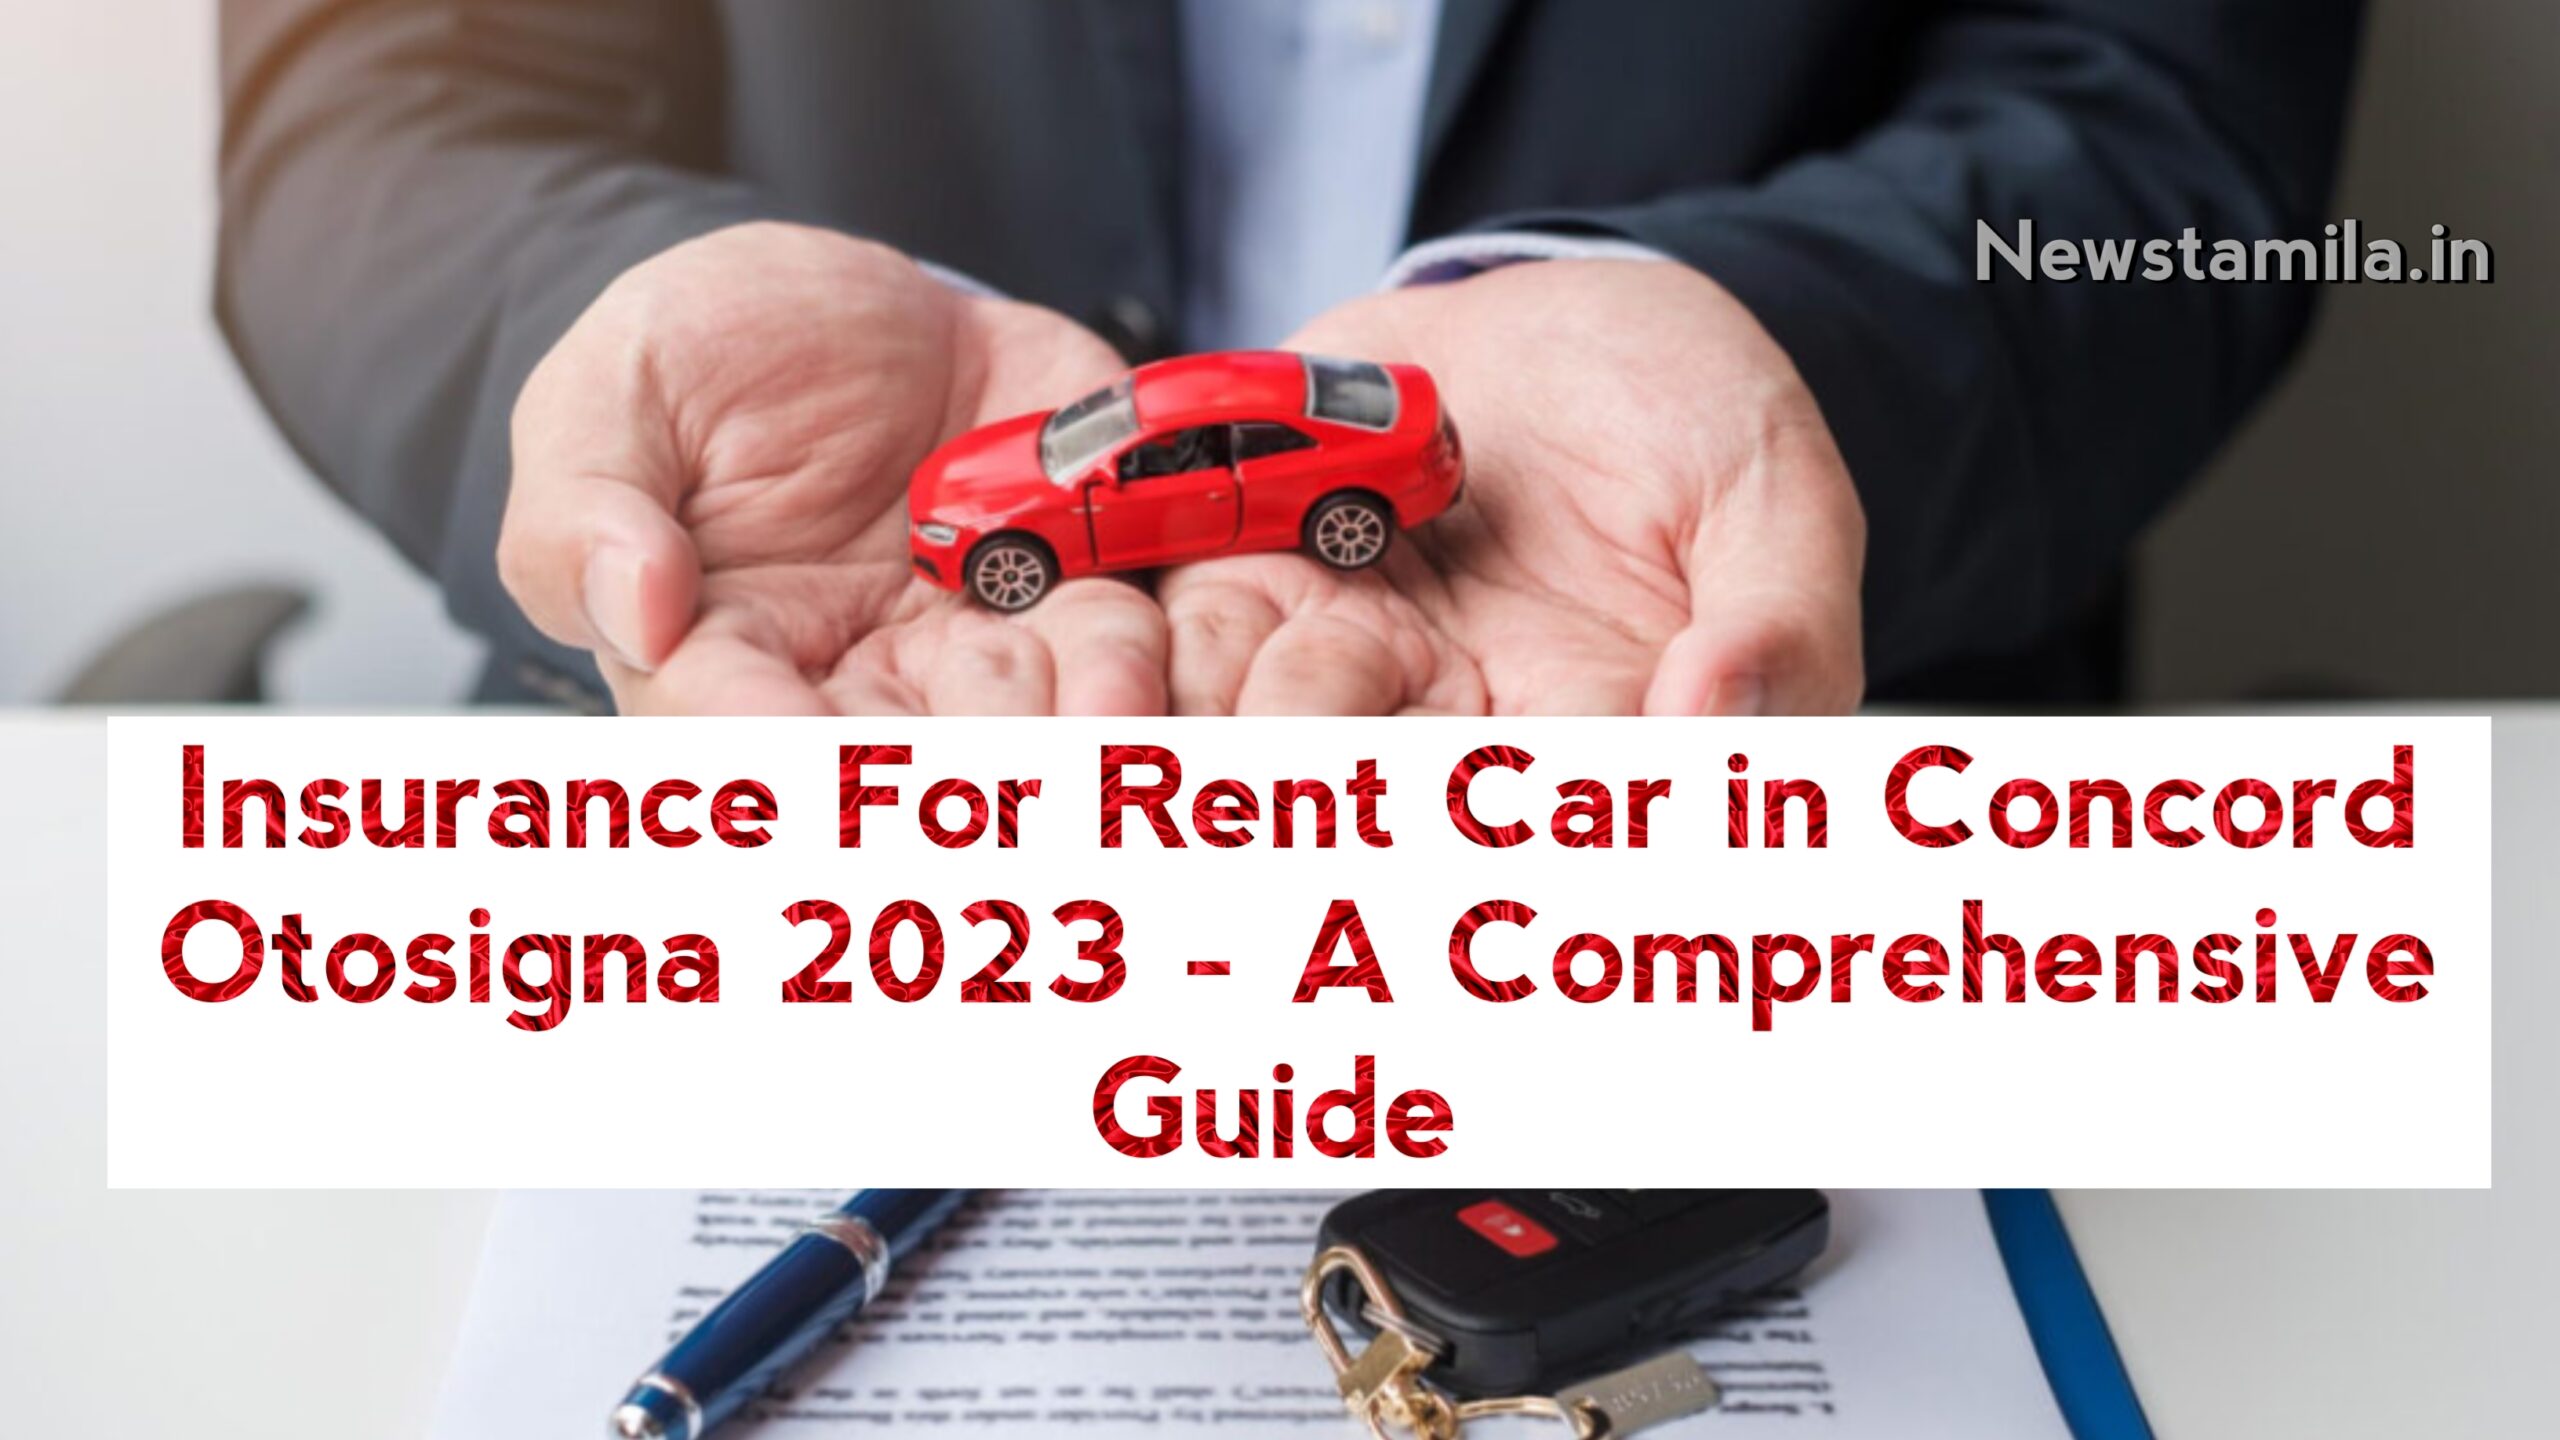 Insurance for rent car in concord otosigna 2023 : A Comprehensive Guide